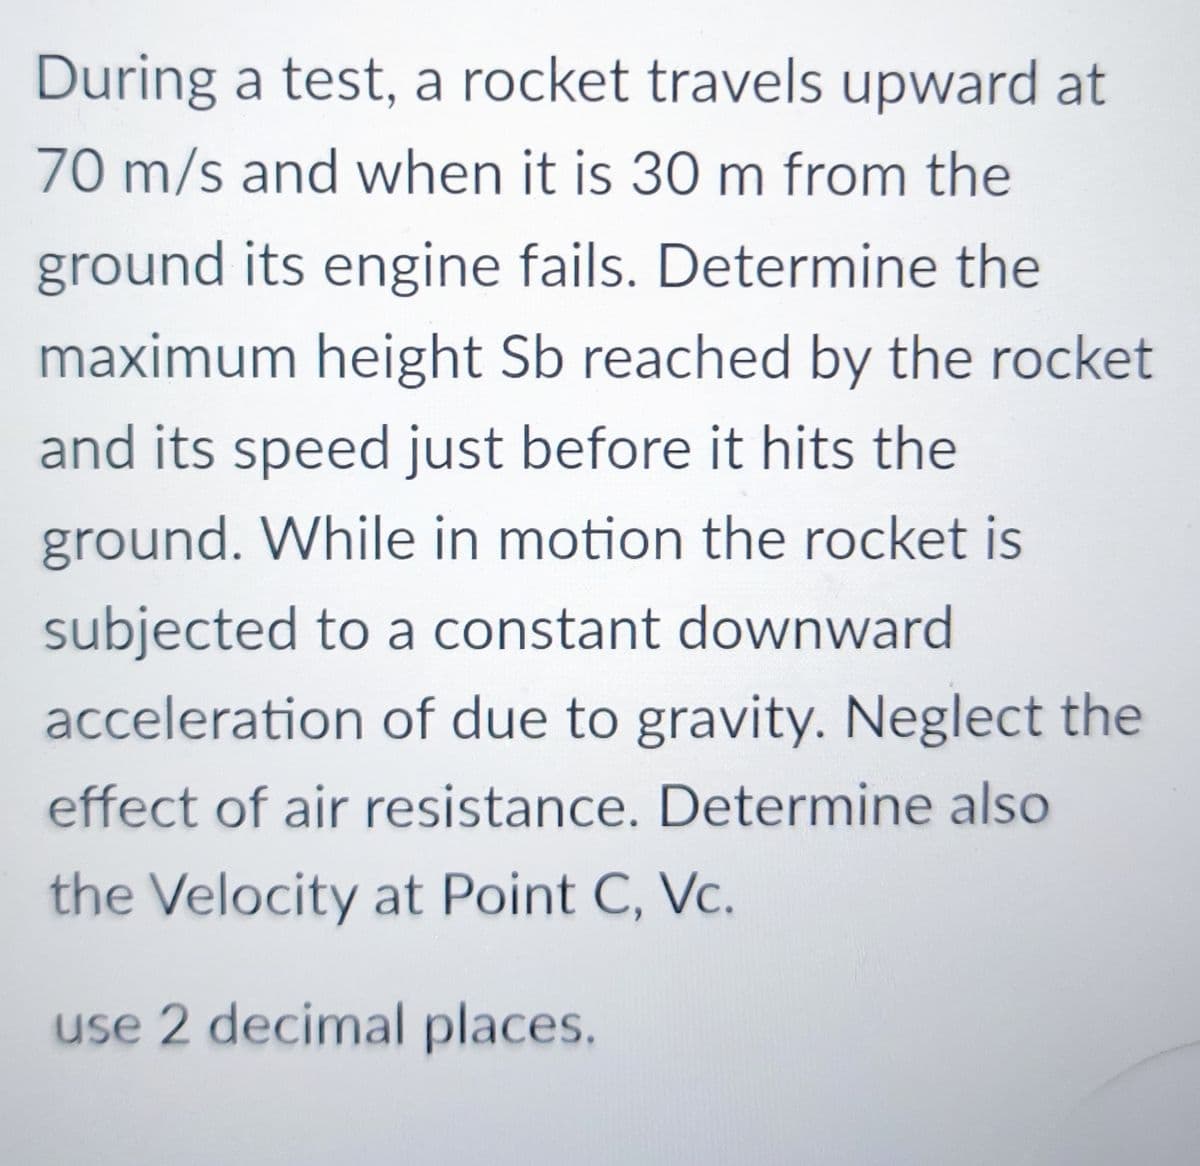 During a test, a rocket travels upward at
70 m/s and when it is 30 m from the
ground its engine fails. Determine the
maximum height Sb reached by the rocket
and its speed just before it hits the
ground. While in motion the rocket is
subjected to a constant downward
acceleration of due to gravity. Neglect the
effect of air resistance. Determine also
the Velocity at Point C, Vc.
use 2 decimal places.
